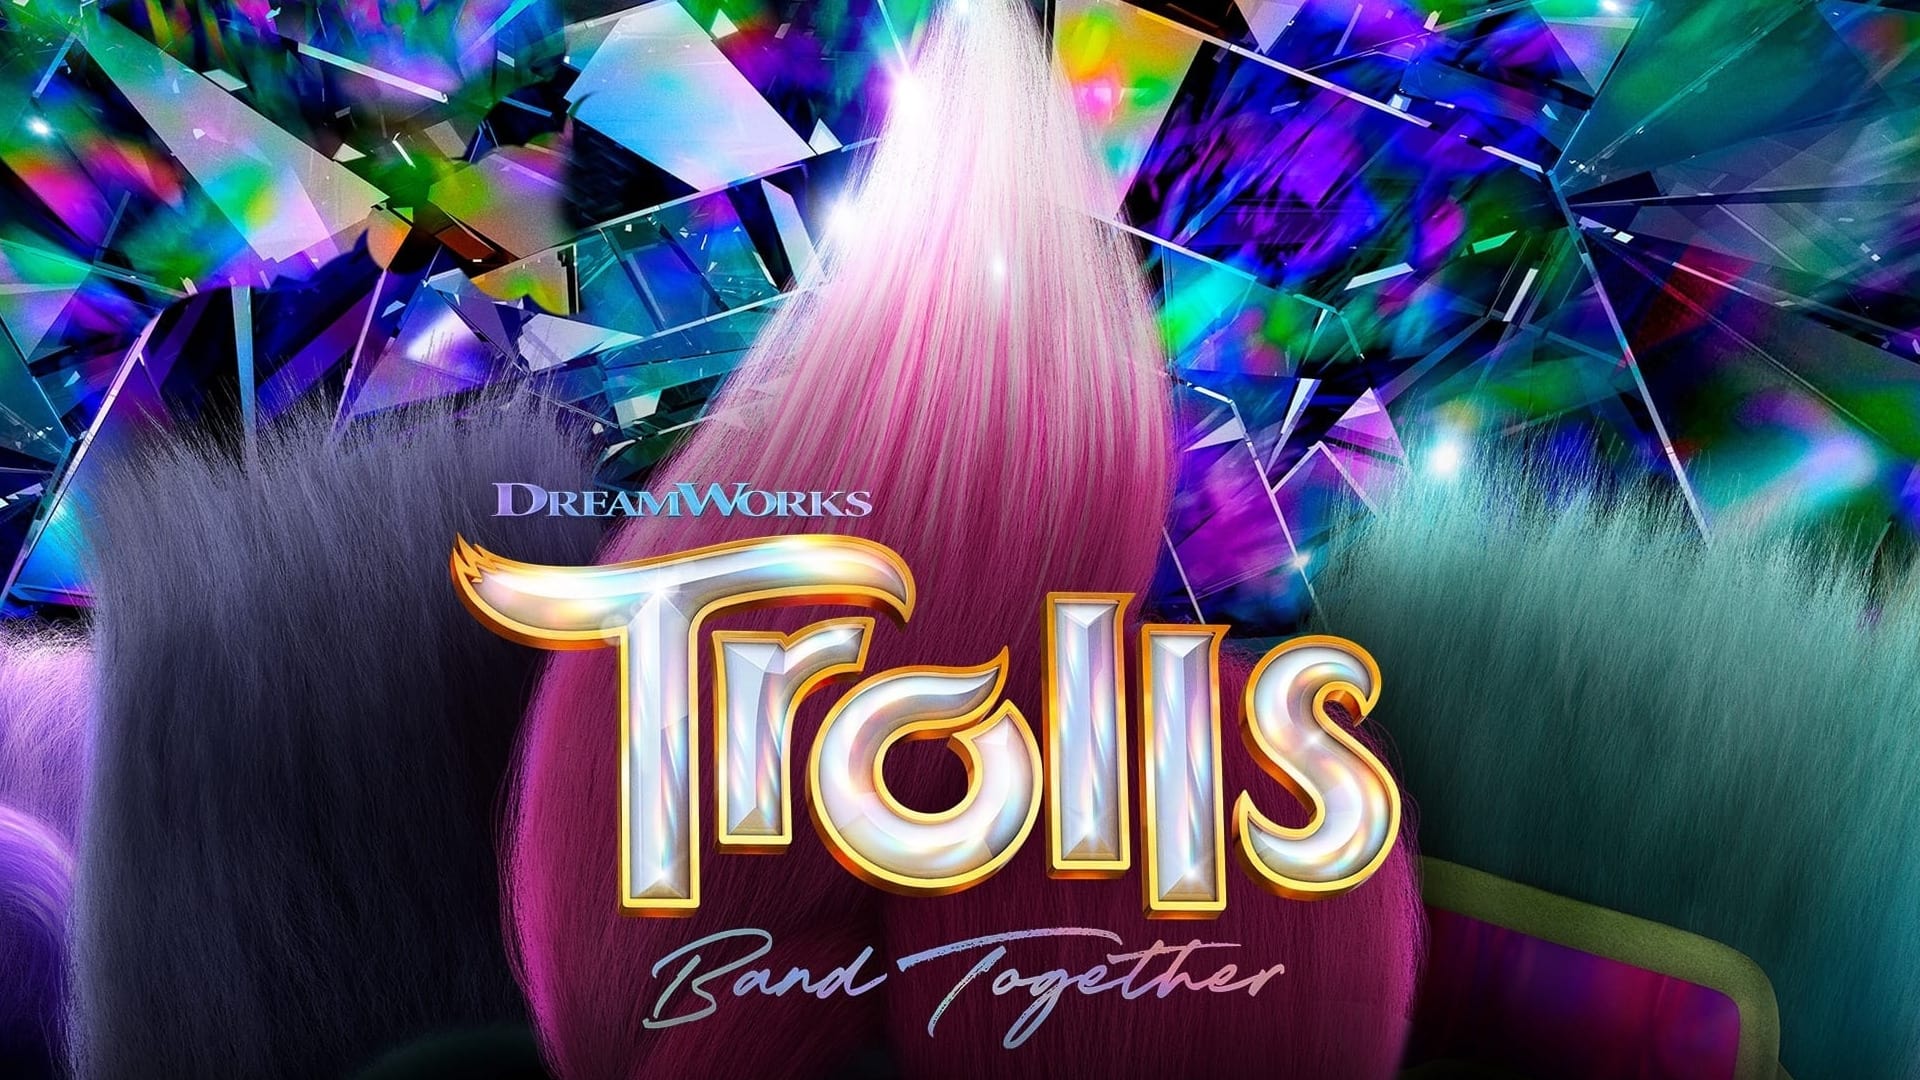 Trolls Band Together Wallpapers - Wallpaper Cave